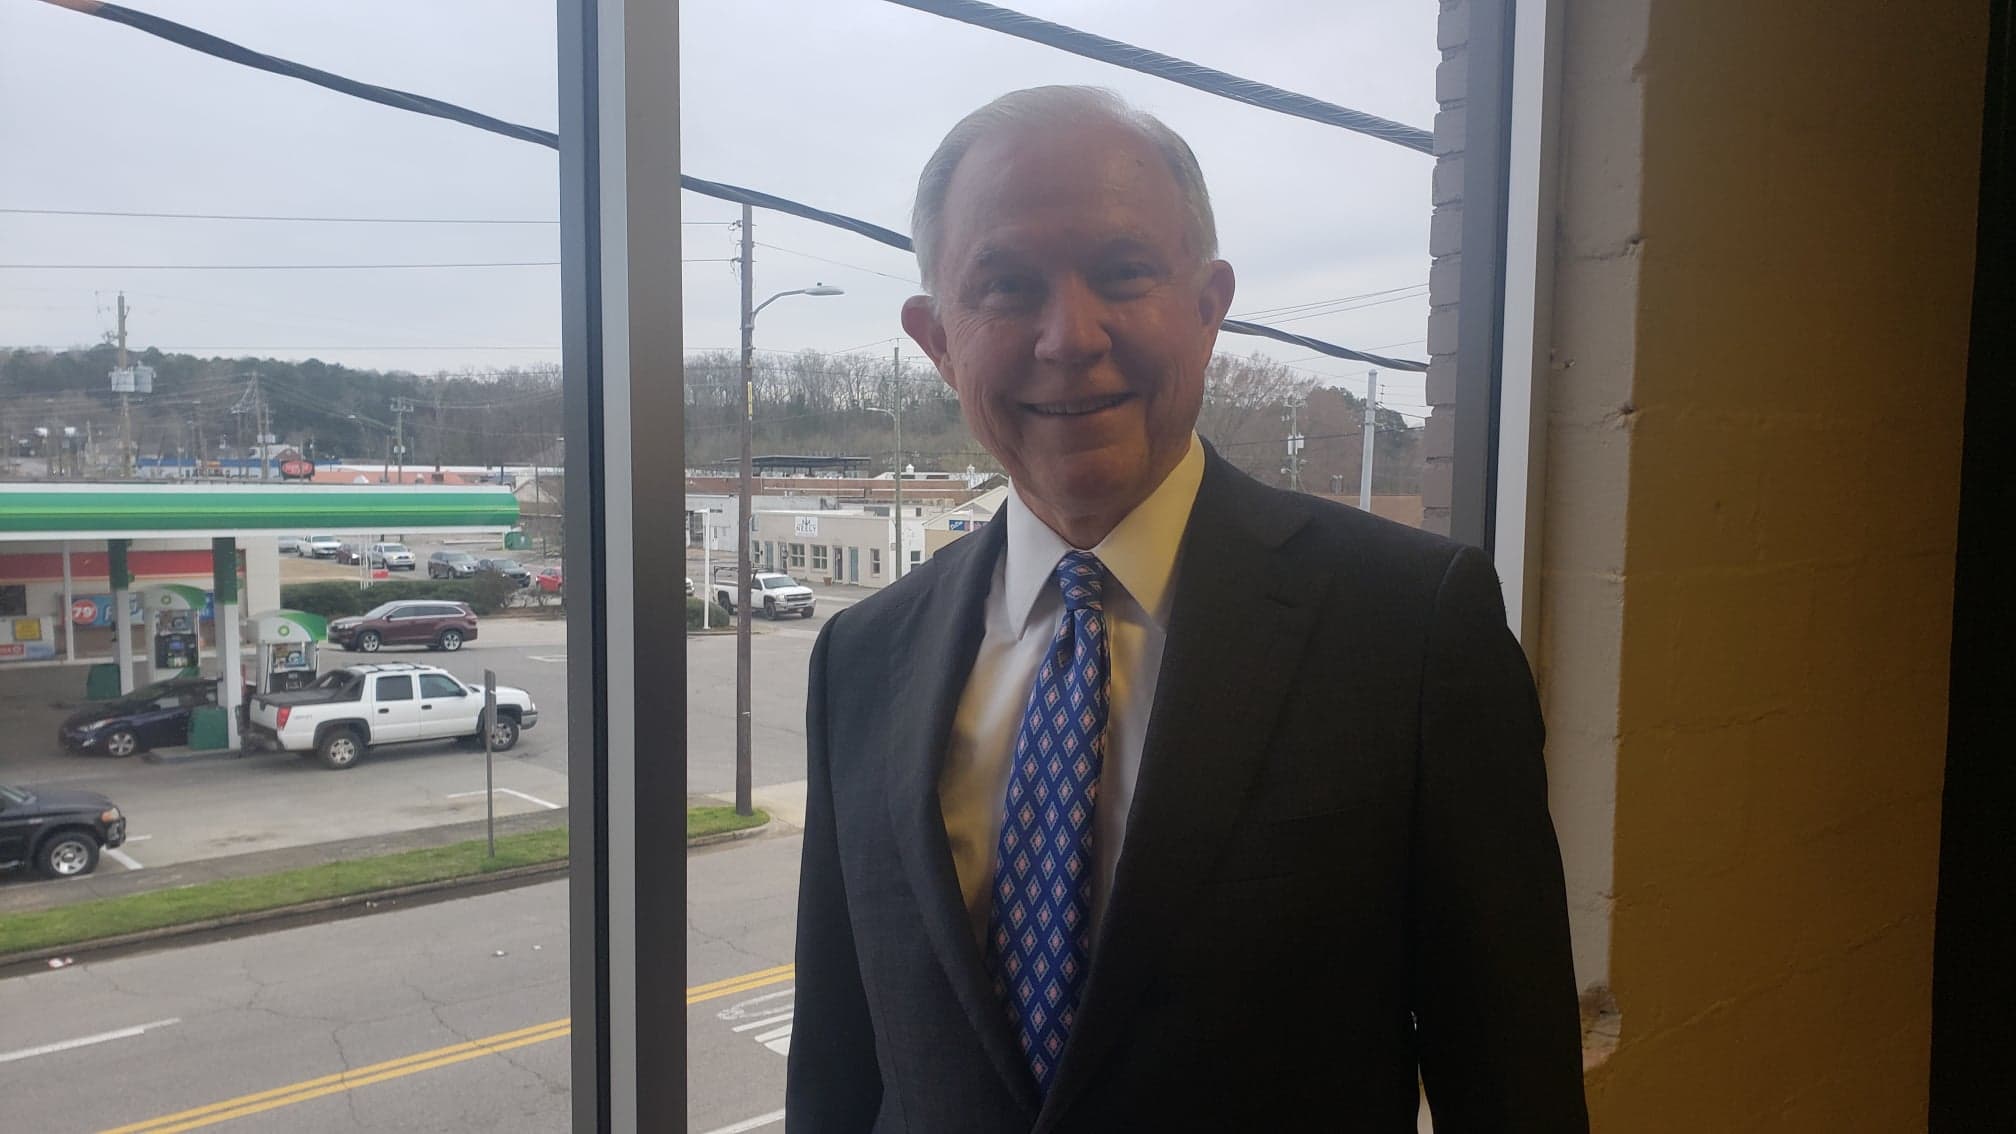 Senate candidate Jeff Sessions stops by The Trussville Tribune one week before primary